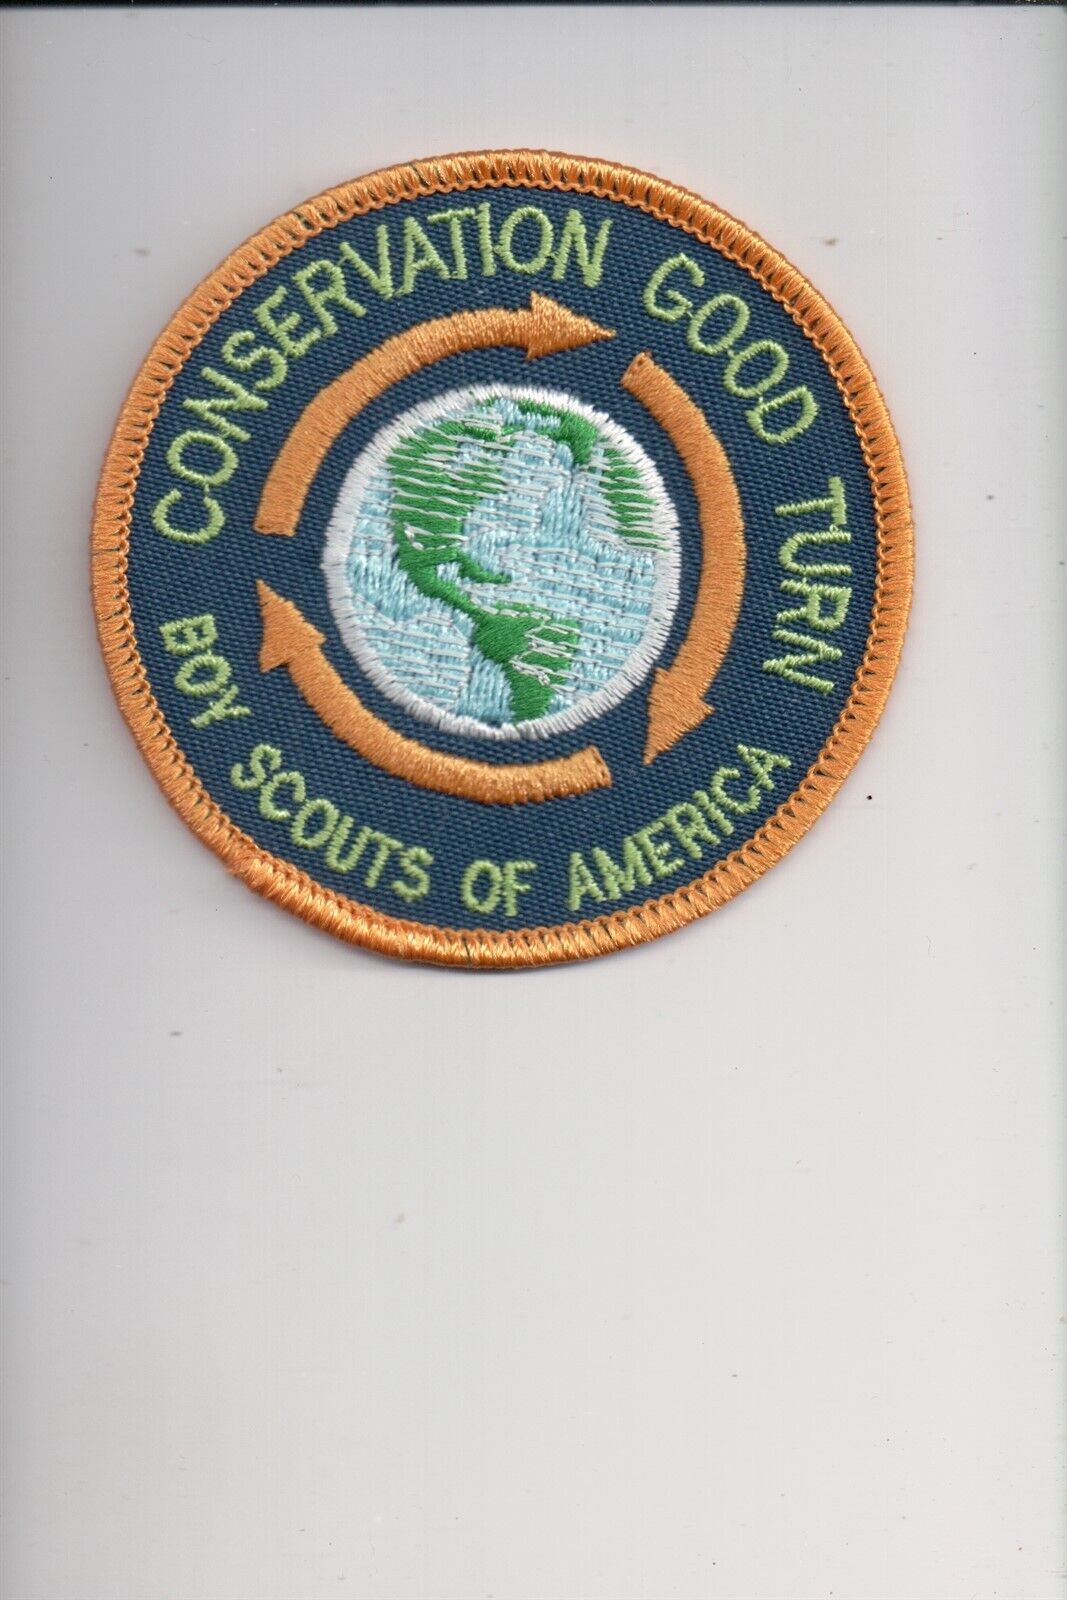 Conservation Good Turn Boy Scouts Of America patch